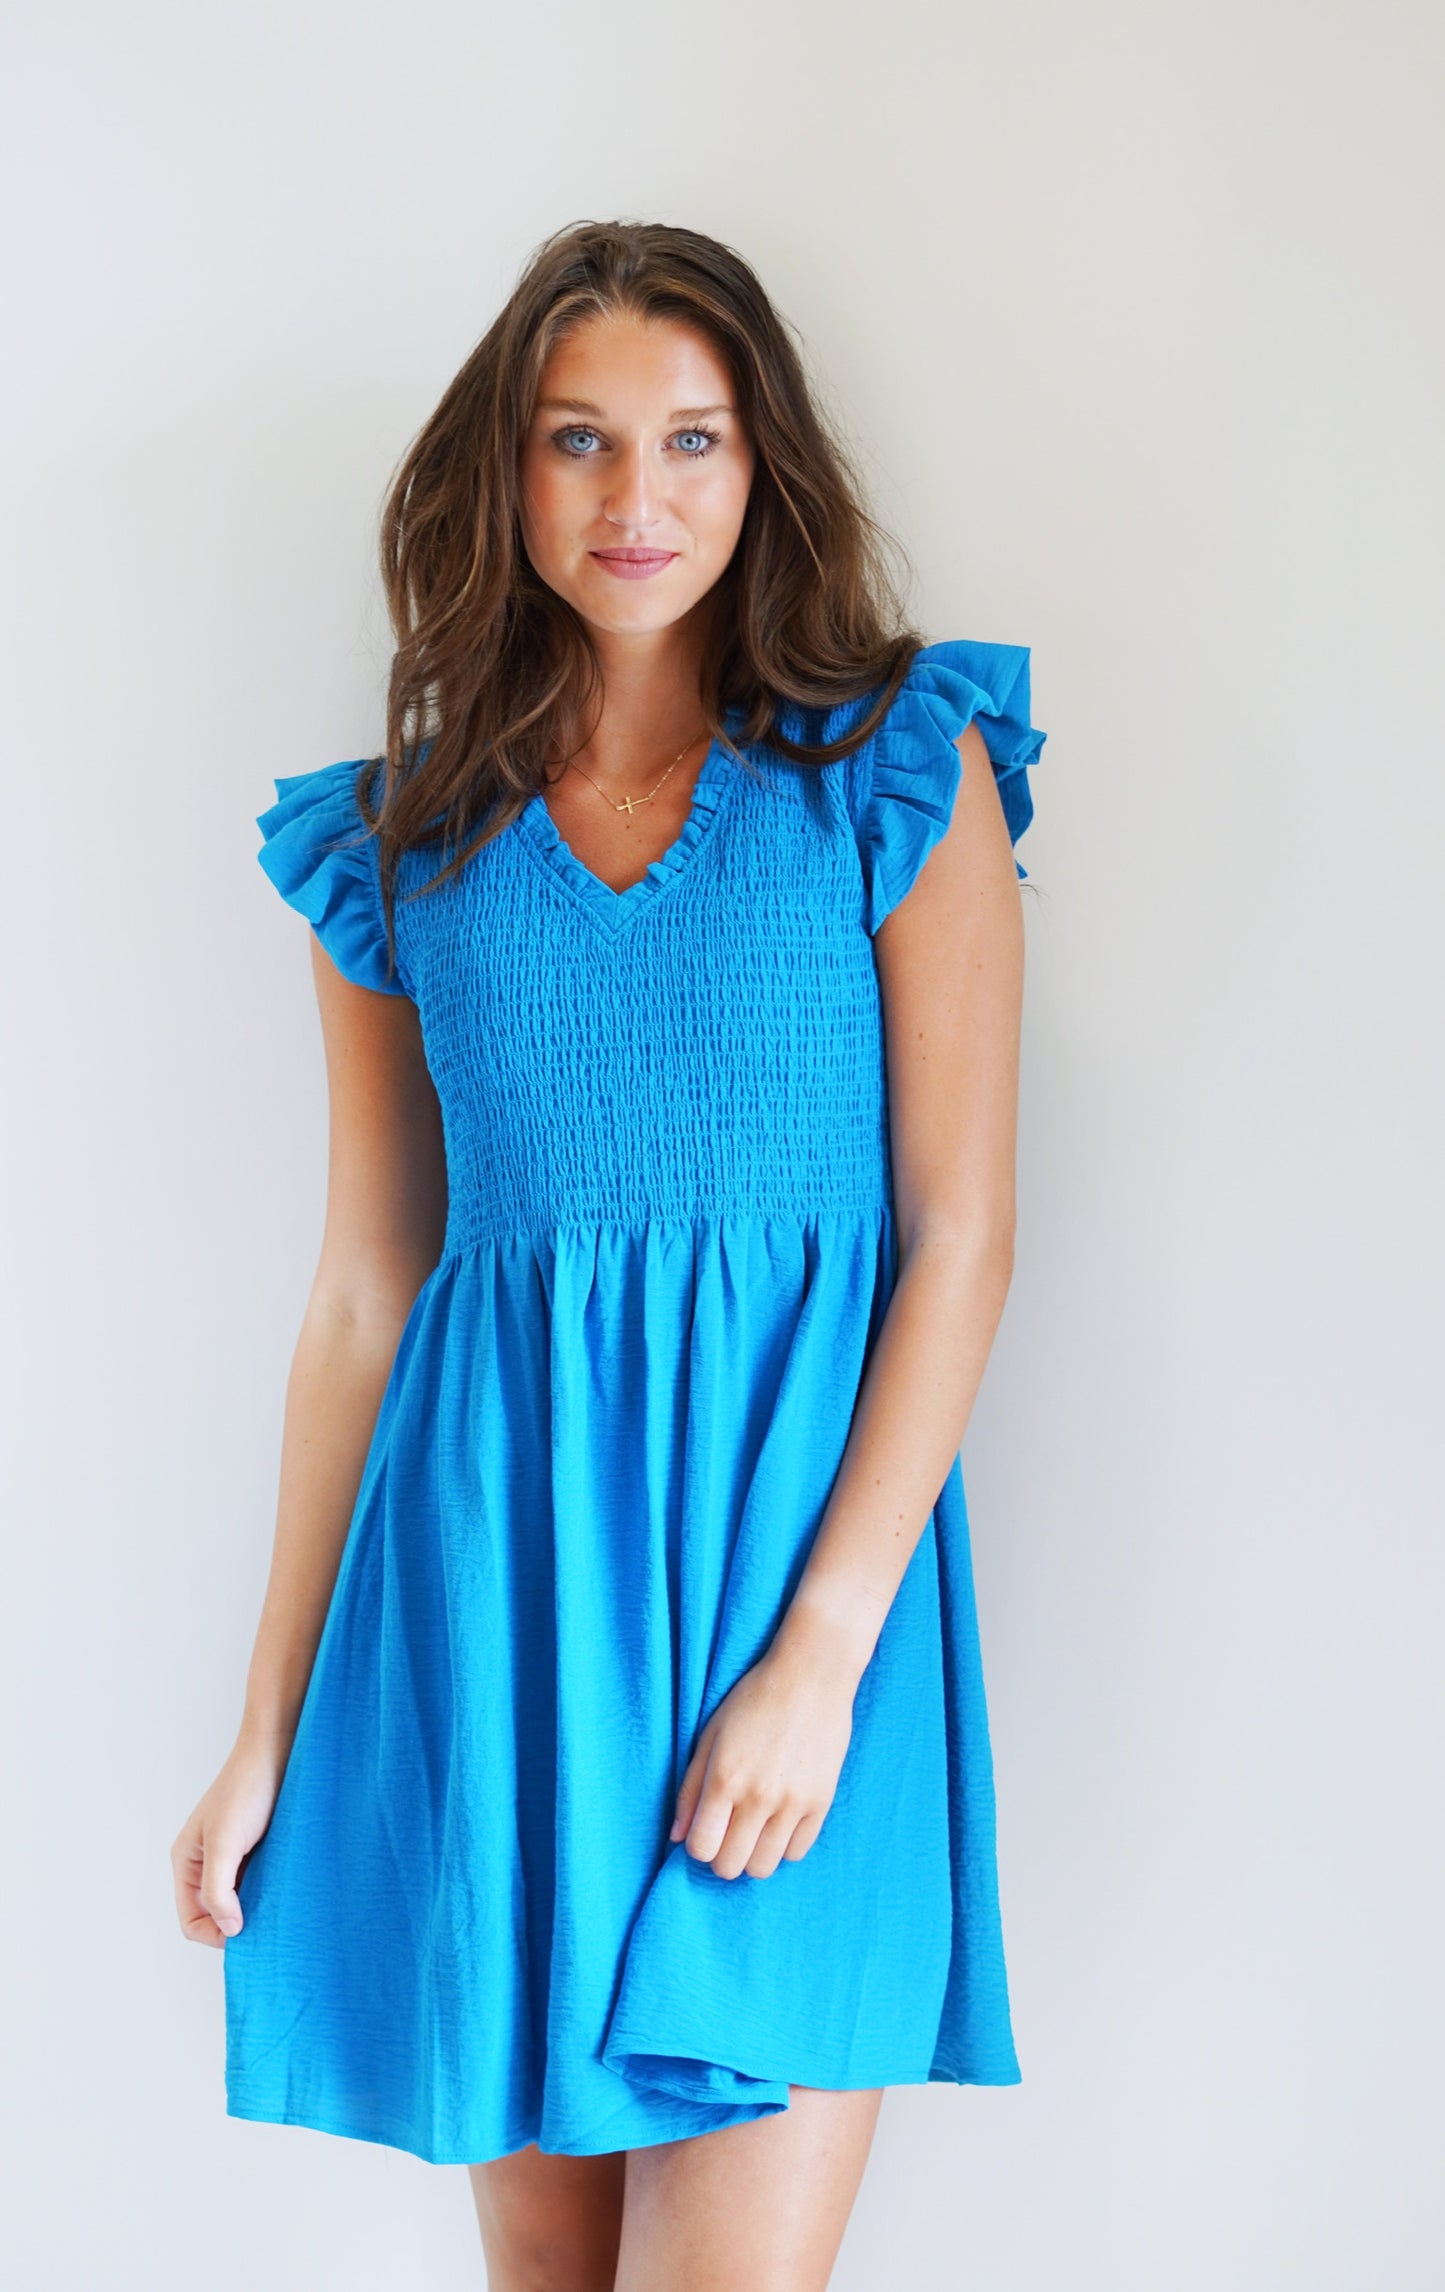  Tiffany Turquoise Ruffled Dress V Neck Line Ruffle Short Sleeve Textured material on top half Turquoise Knee Length Dress 100% Polyester Hand Wash Cold,Line Dry Model is wearing size: Small